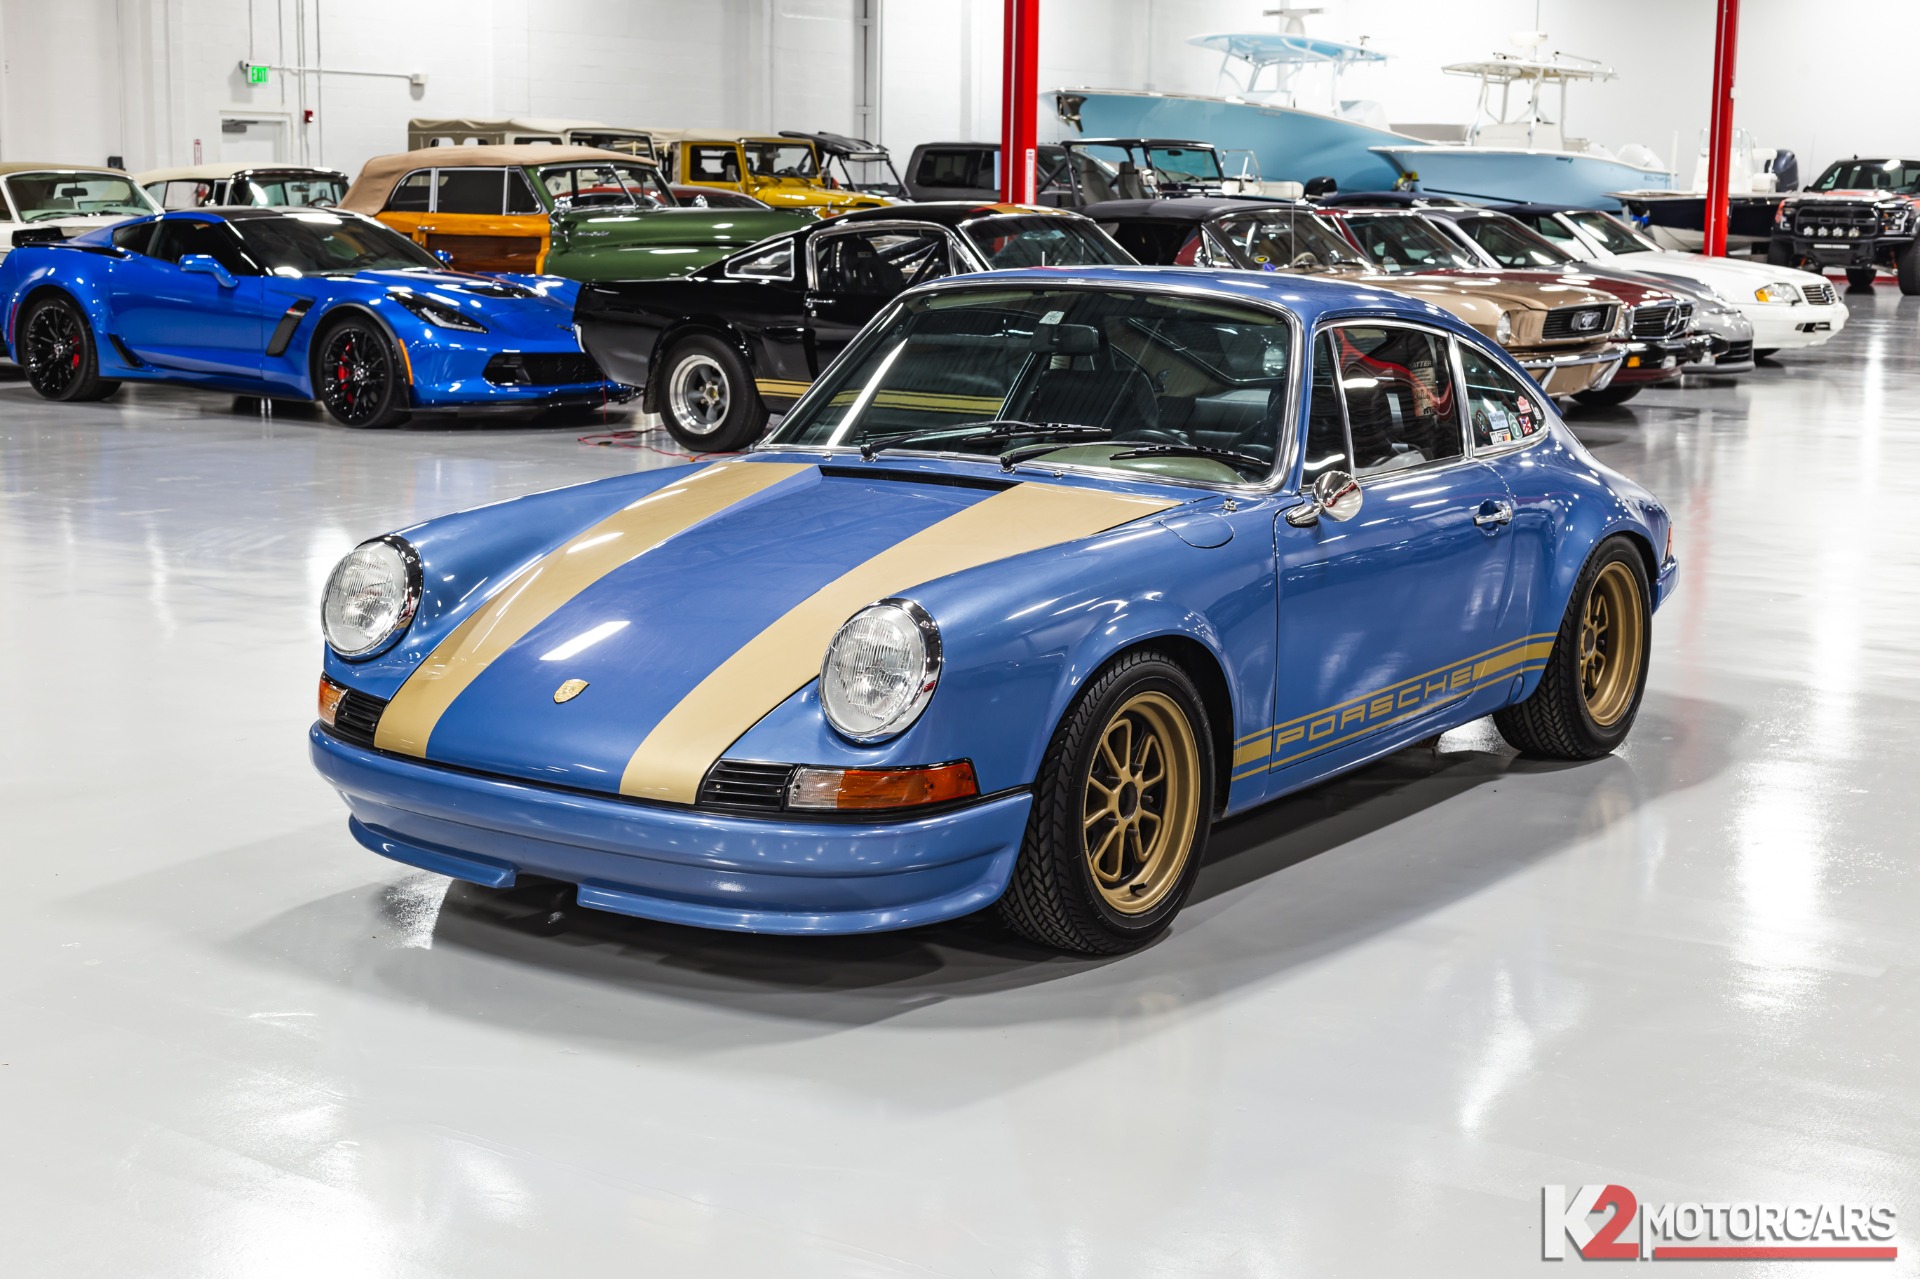 bodem Kust Encyclopedie Used 1973 Porsche 911T Twin-Plug Outlaw For Sale (Sold) | K2 Motorcars  Stock #00015